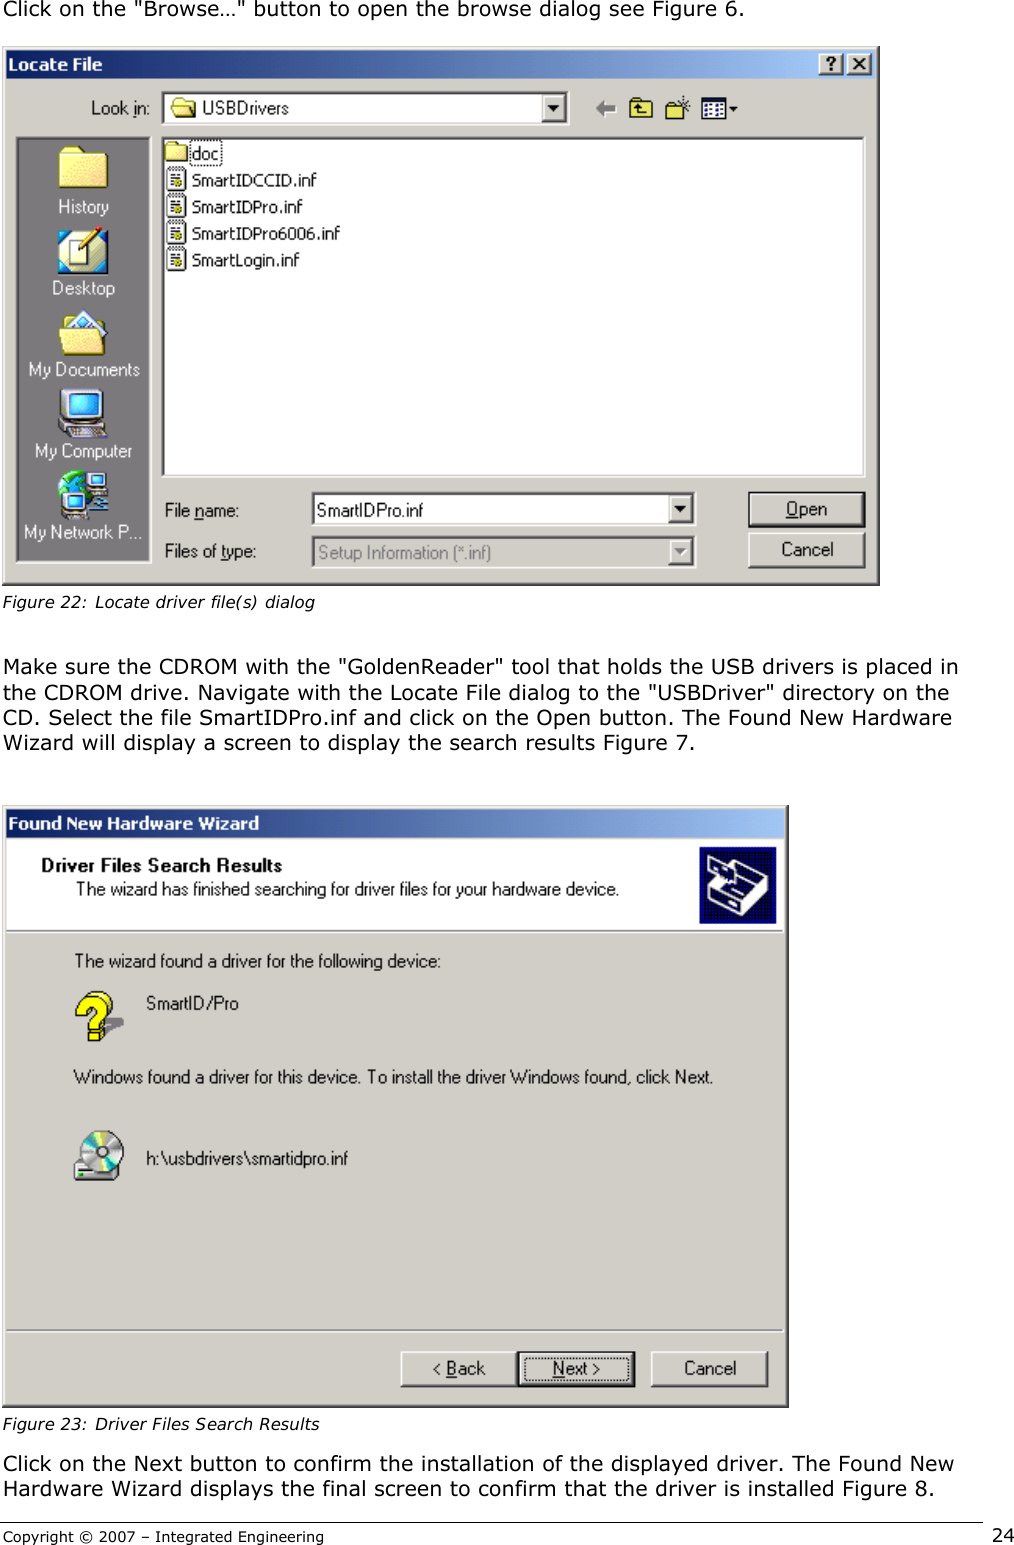 Copyright © 2007 – Integrated Engineering   24 Click on the &quot;Browse…&quot; button to open the browse dialog see Figure 6.   Figure 22: Locate driver file(s) dialog  Make sure the CDROM with the &quot;GoldenReader&quot; tool that holds the USB drivers is placed in the CDROM drive. Navigate with the Locate File dialog to the &quot;USBDriver&quot; directory on the CD. Select the file SmartIDPro.inf and click on the Open button. The Found New Hardware Wizard will display a screen to display the search results Figure 7.    Figure 23: Driver Files Search Results Click on the Next button to confirm the installation of the displayed driver. The Found New Hardware Wizard displays the final screen to confirm that the driver is installed Figure 8. 